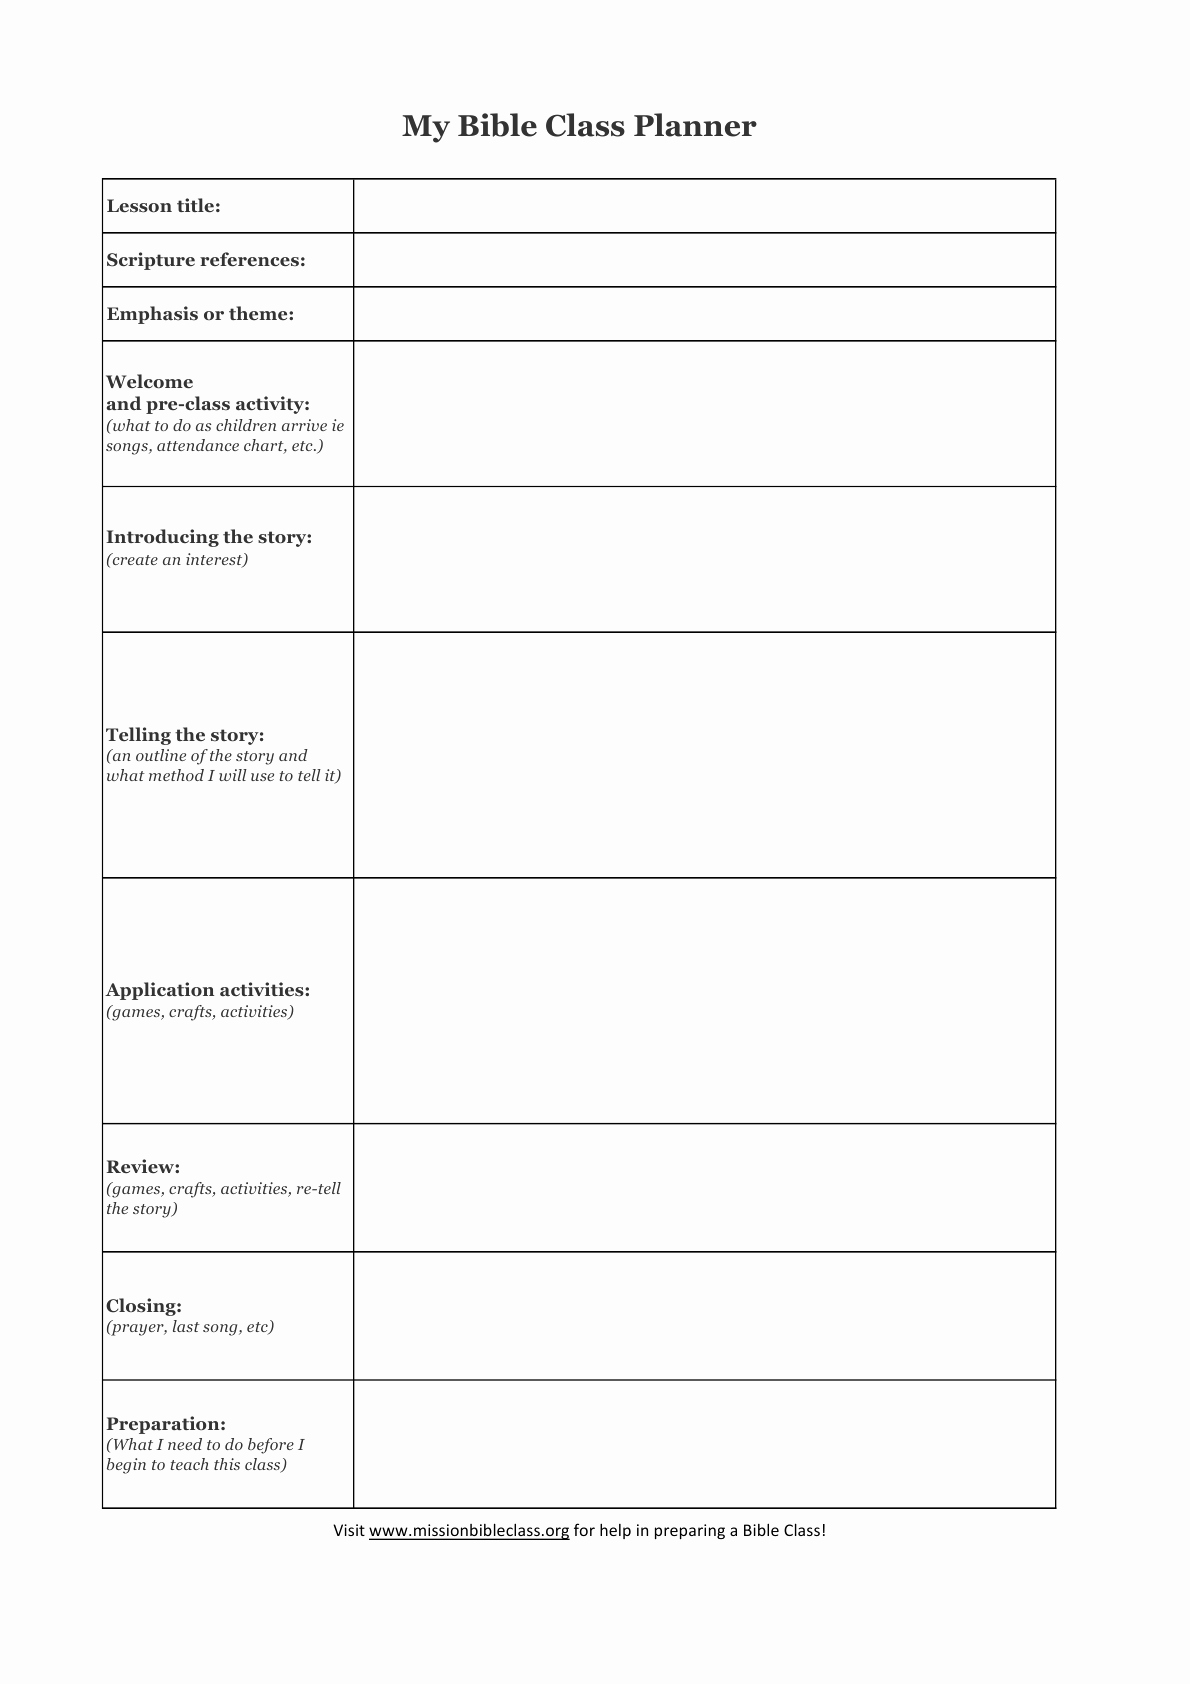 Bible Study Outline Template Elegant Blank Lesson Plan Templates to Print